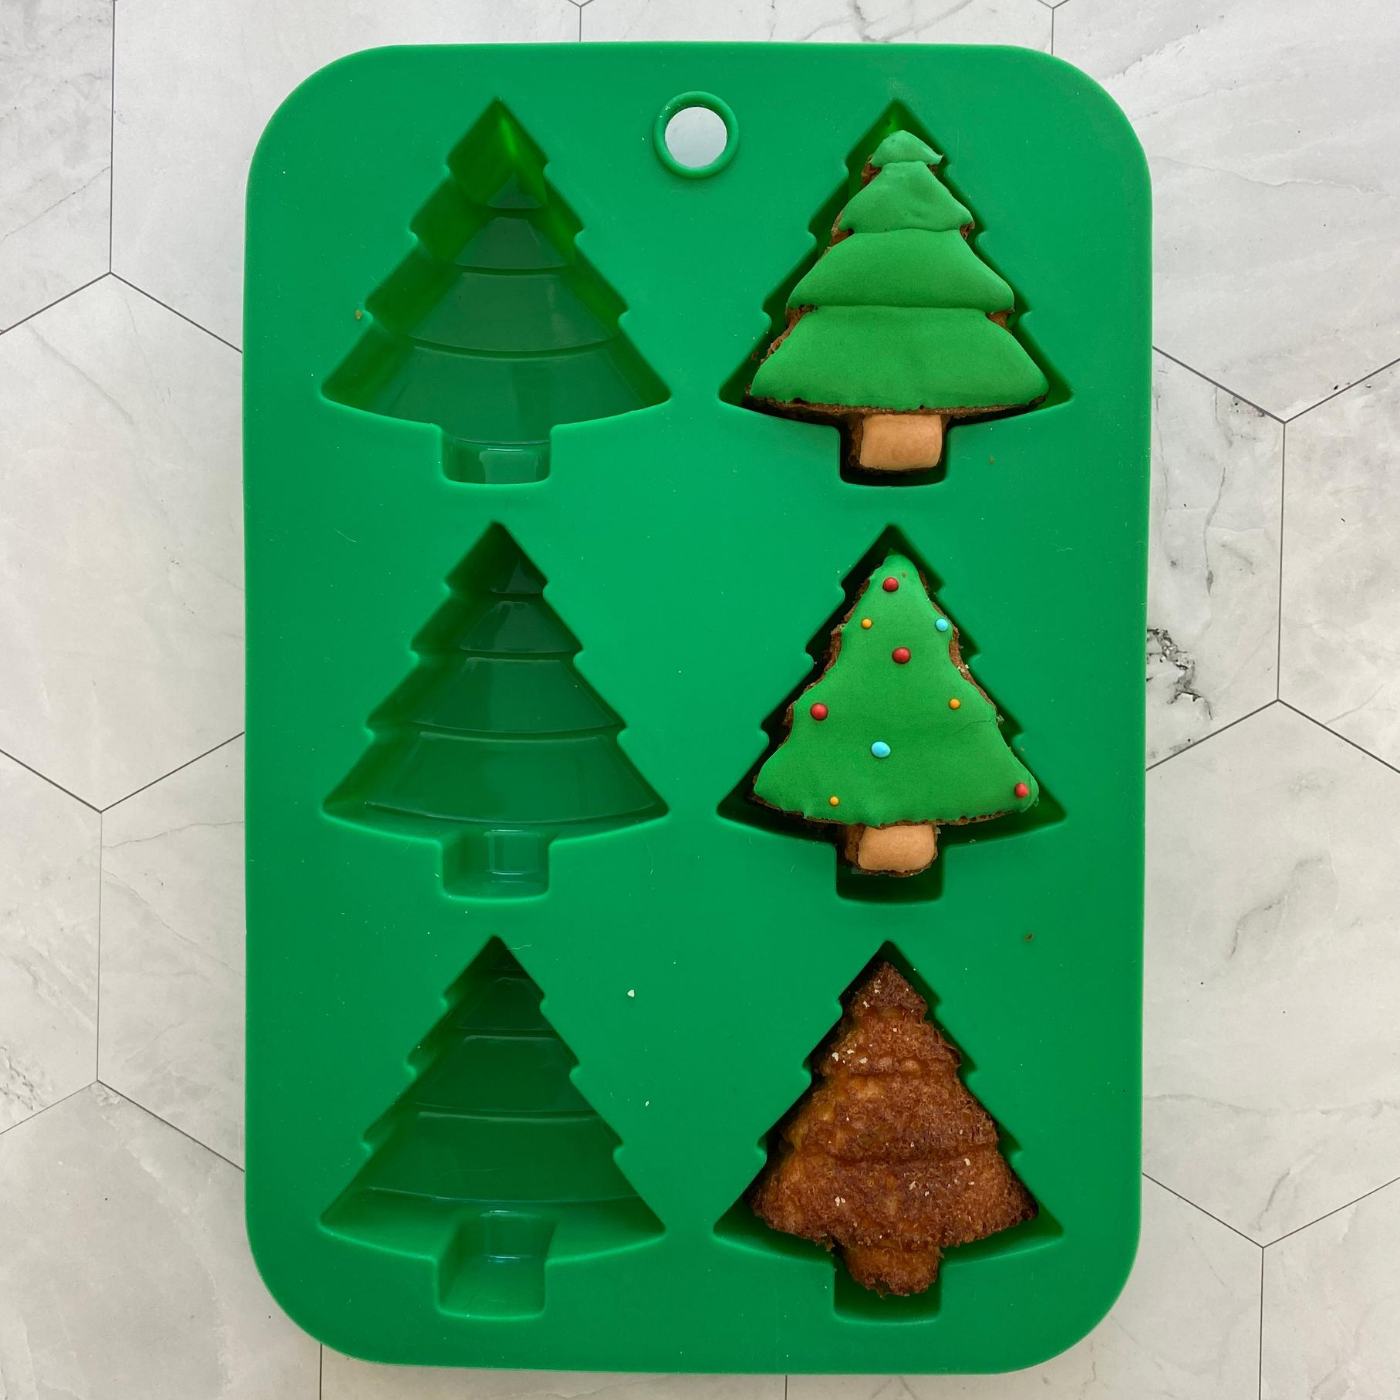 Image of the Winter Wonderland Holiday Tree Cupcake Mold with three completed cupcakes inside of the mold.